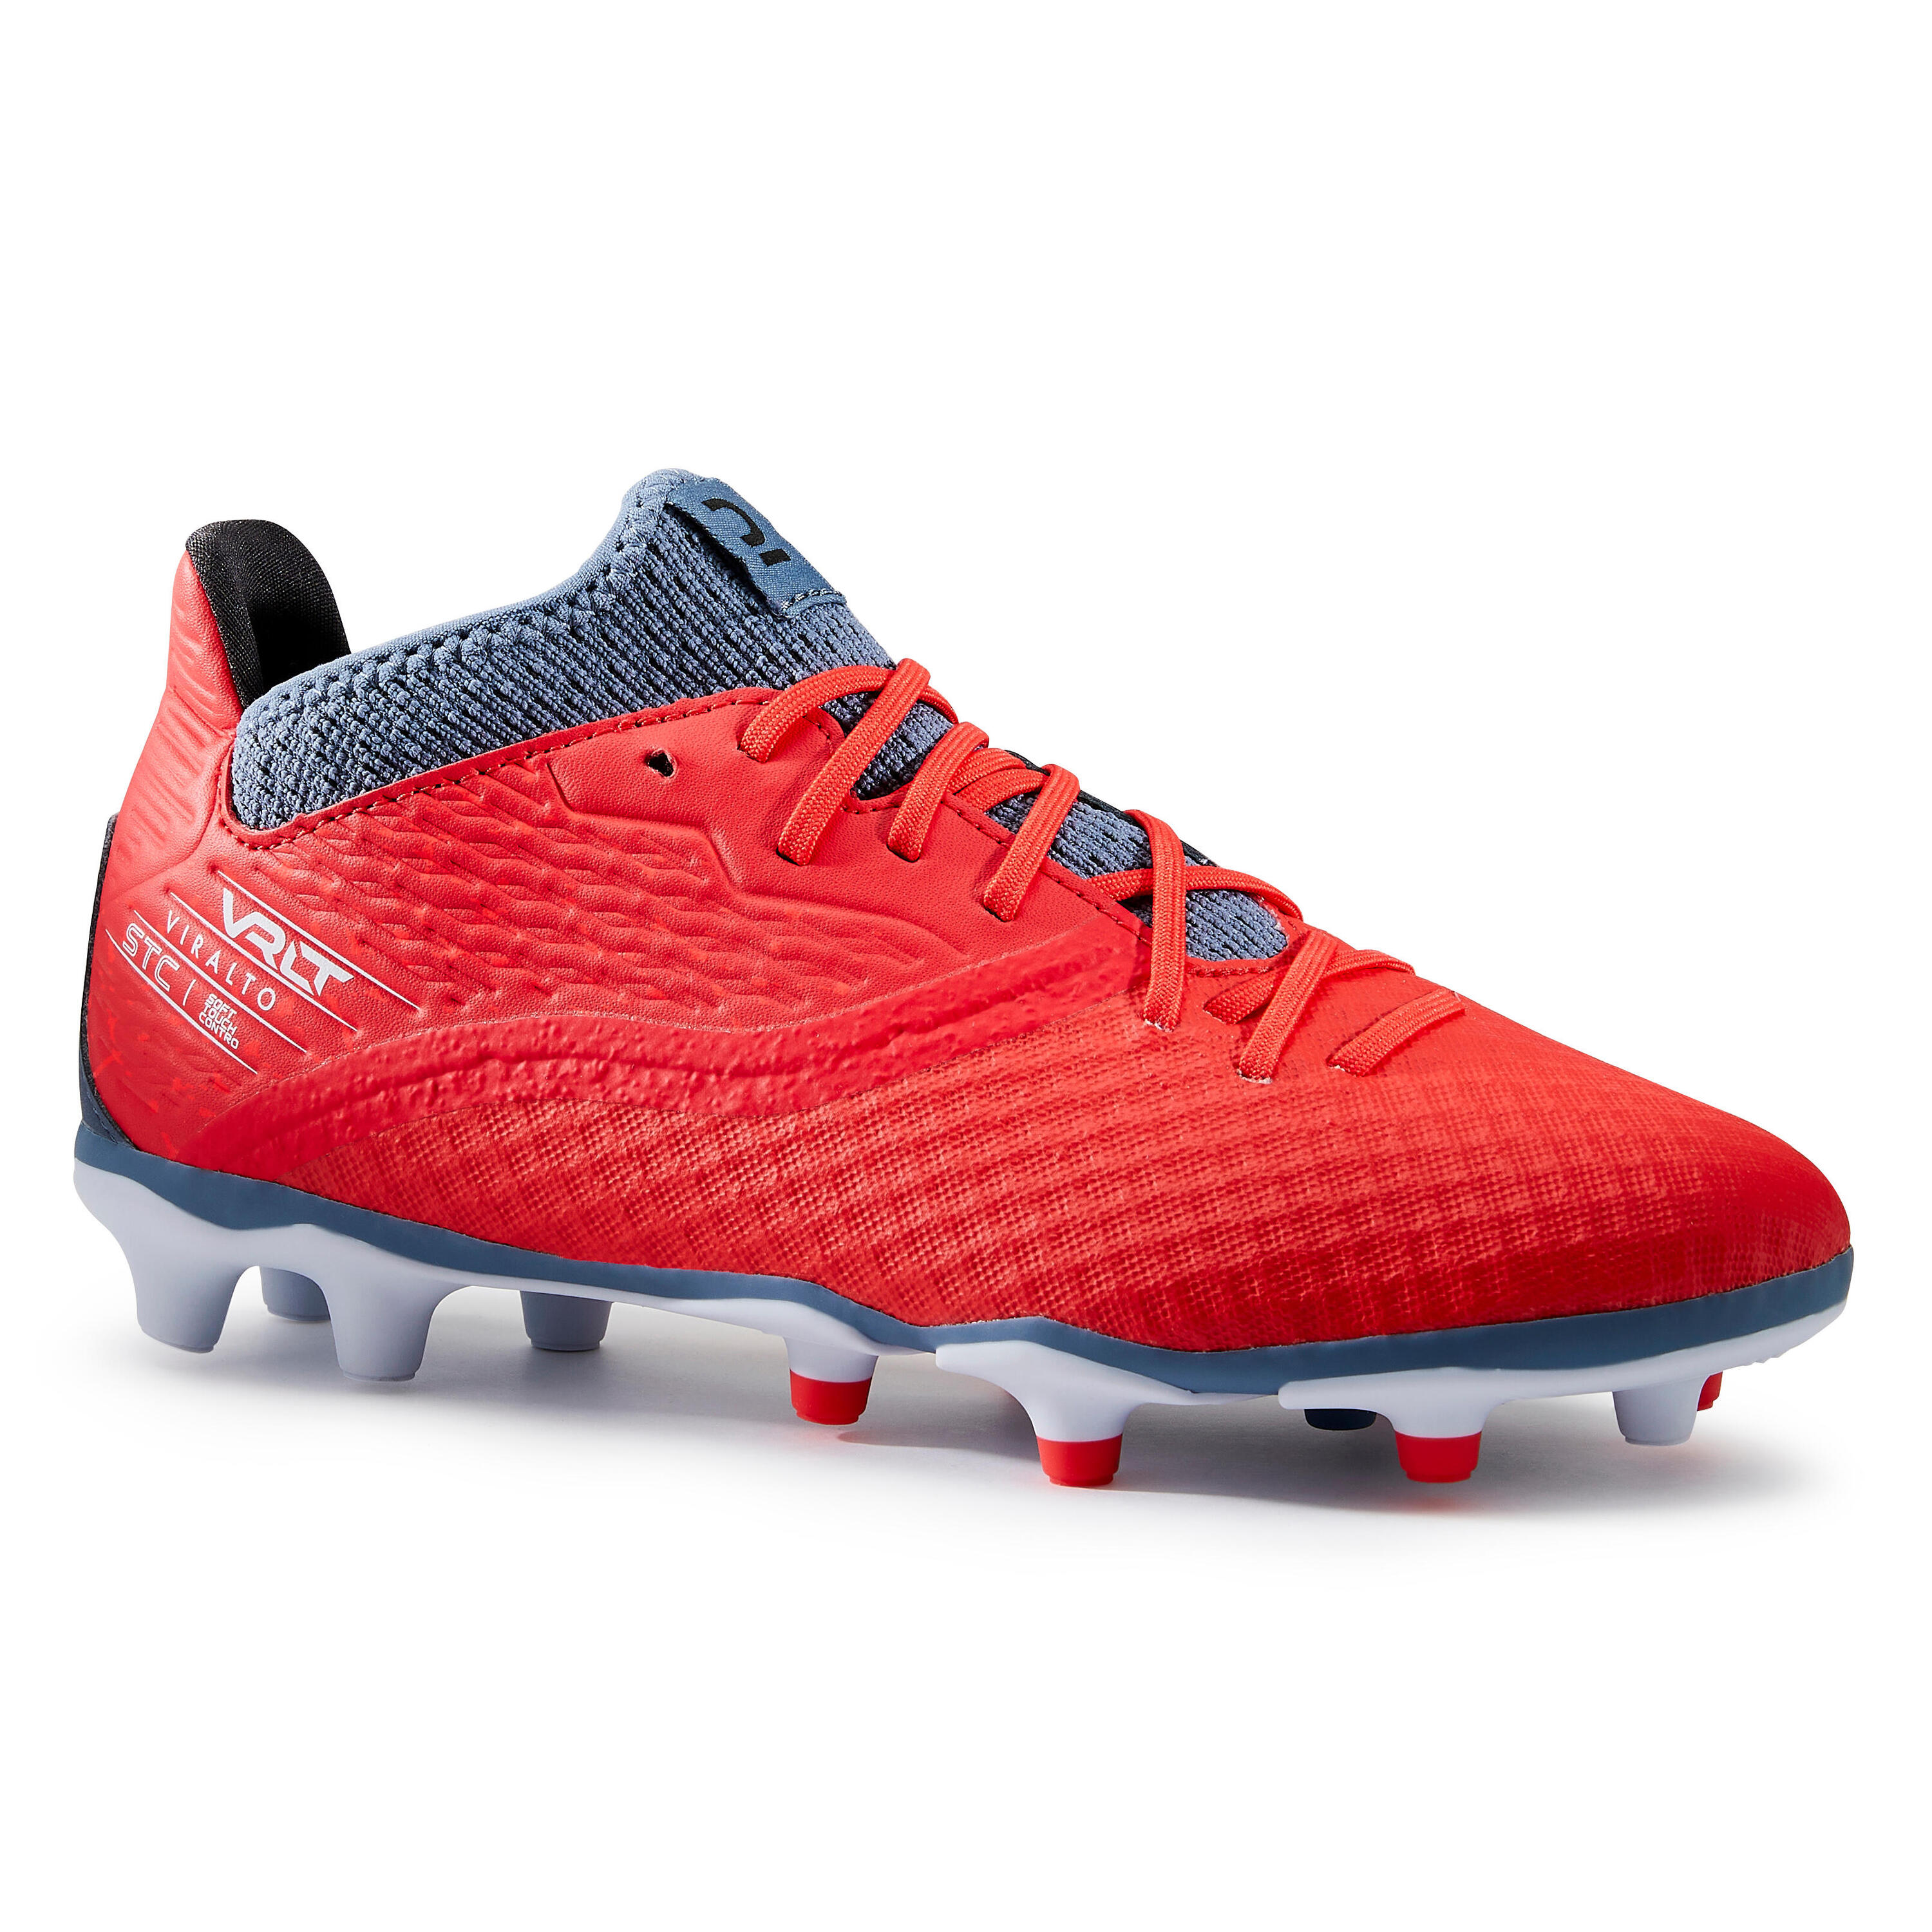 Kids' Lace-Up Football Boots Viralto III FG - Red/Grey 1/11